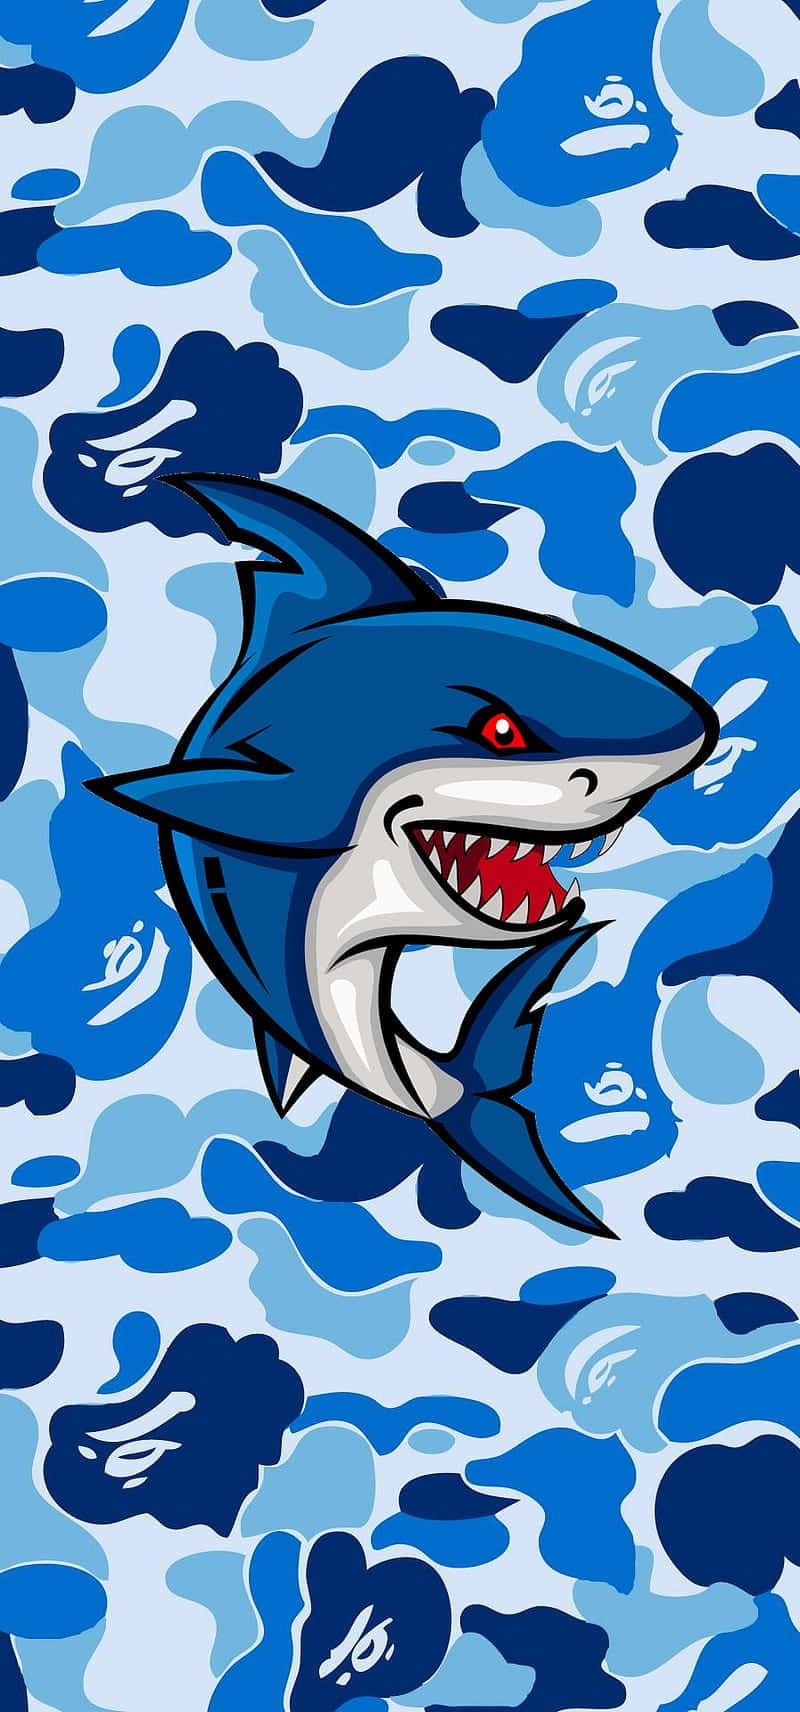 Animated Shark Camouflage Pattern Wallpaper